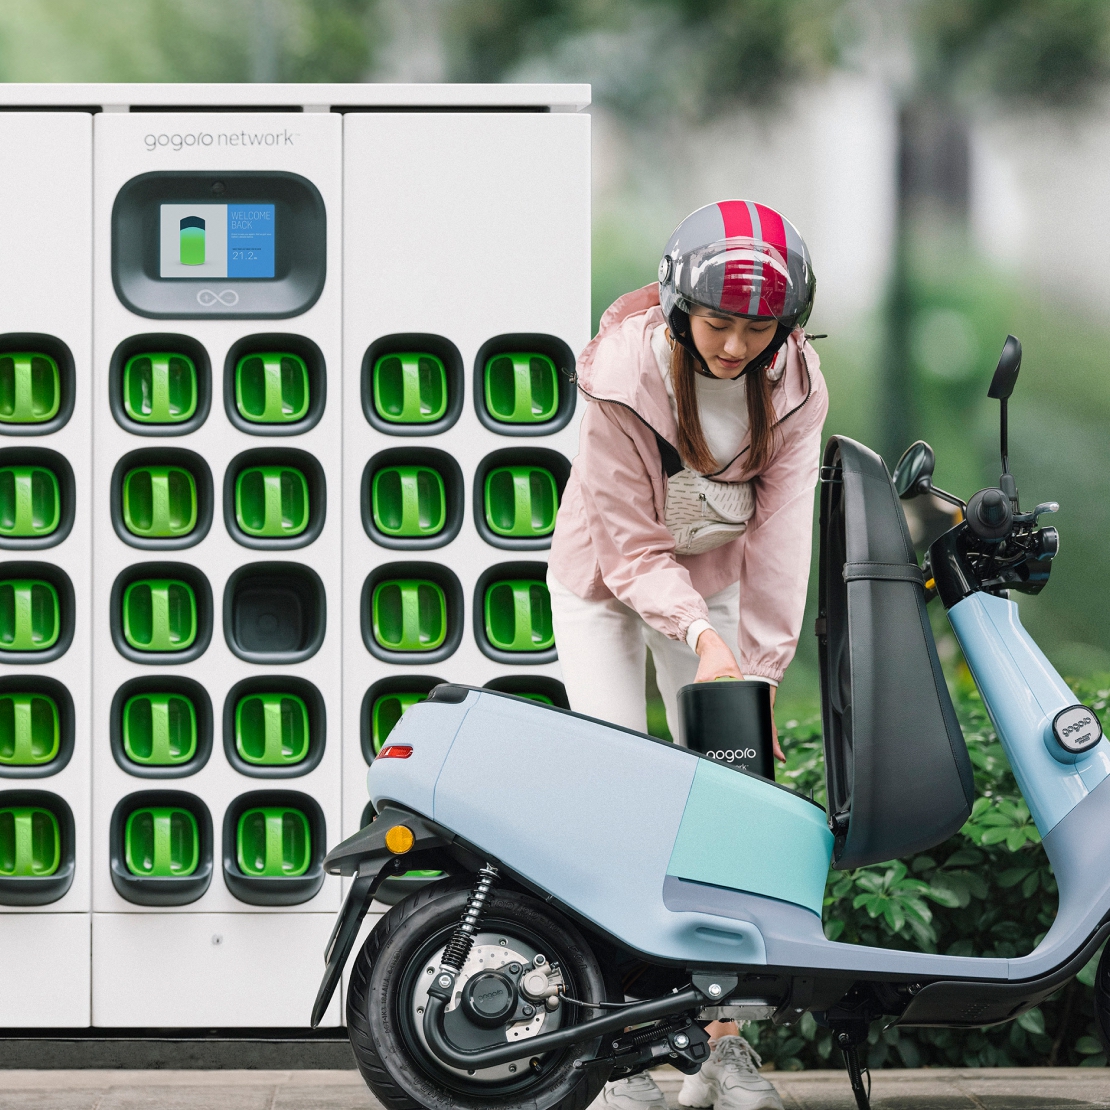 A promotional picture showing a Gogoro battery rack with the NFC tap screen at the top of the rack for paying for the battery exchange